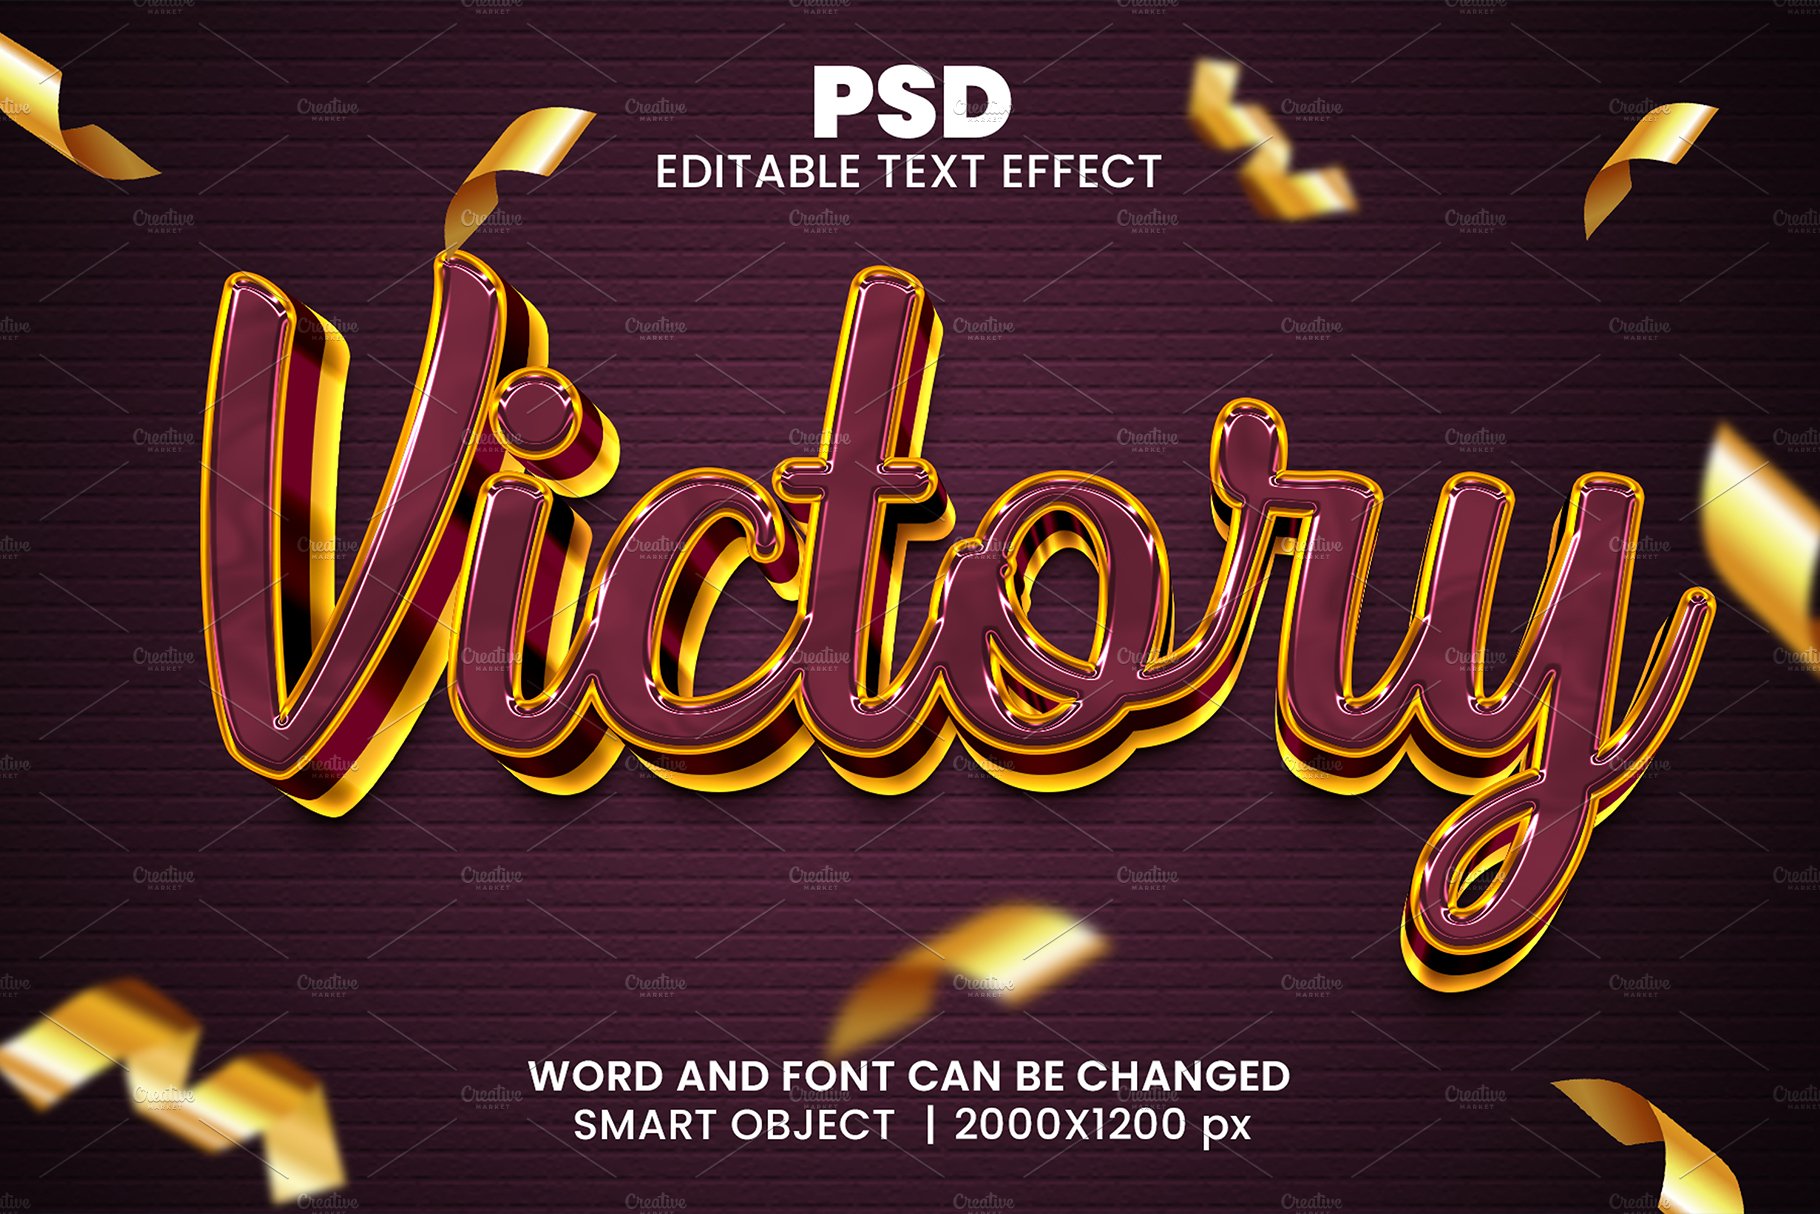 Victory 3d Editable Psd Text Effectcover image.